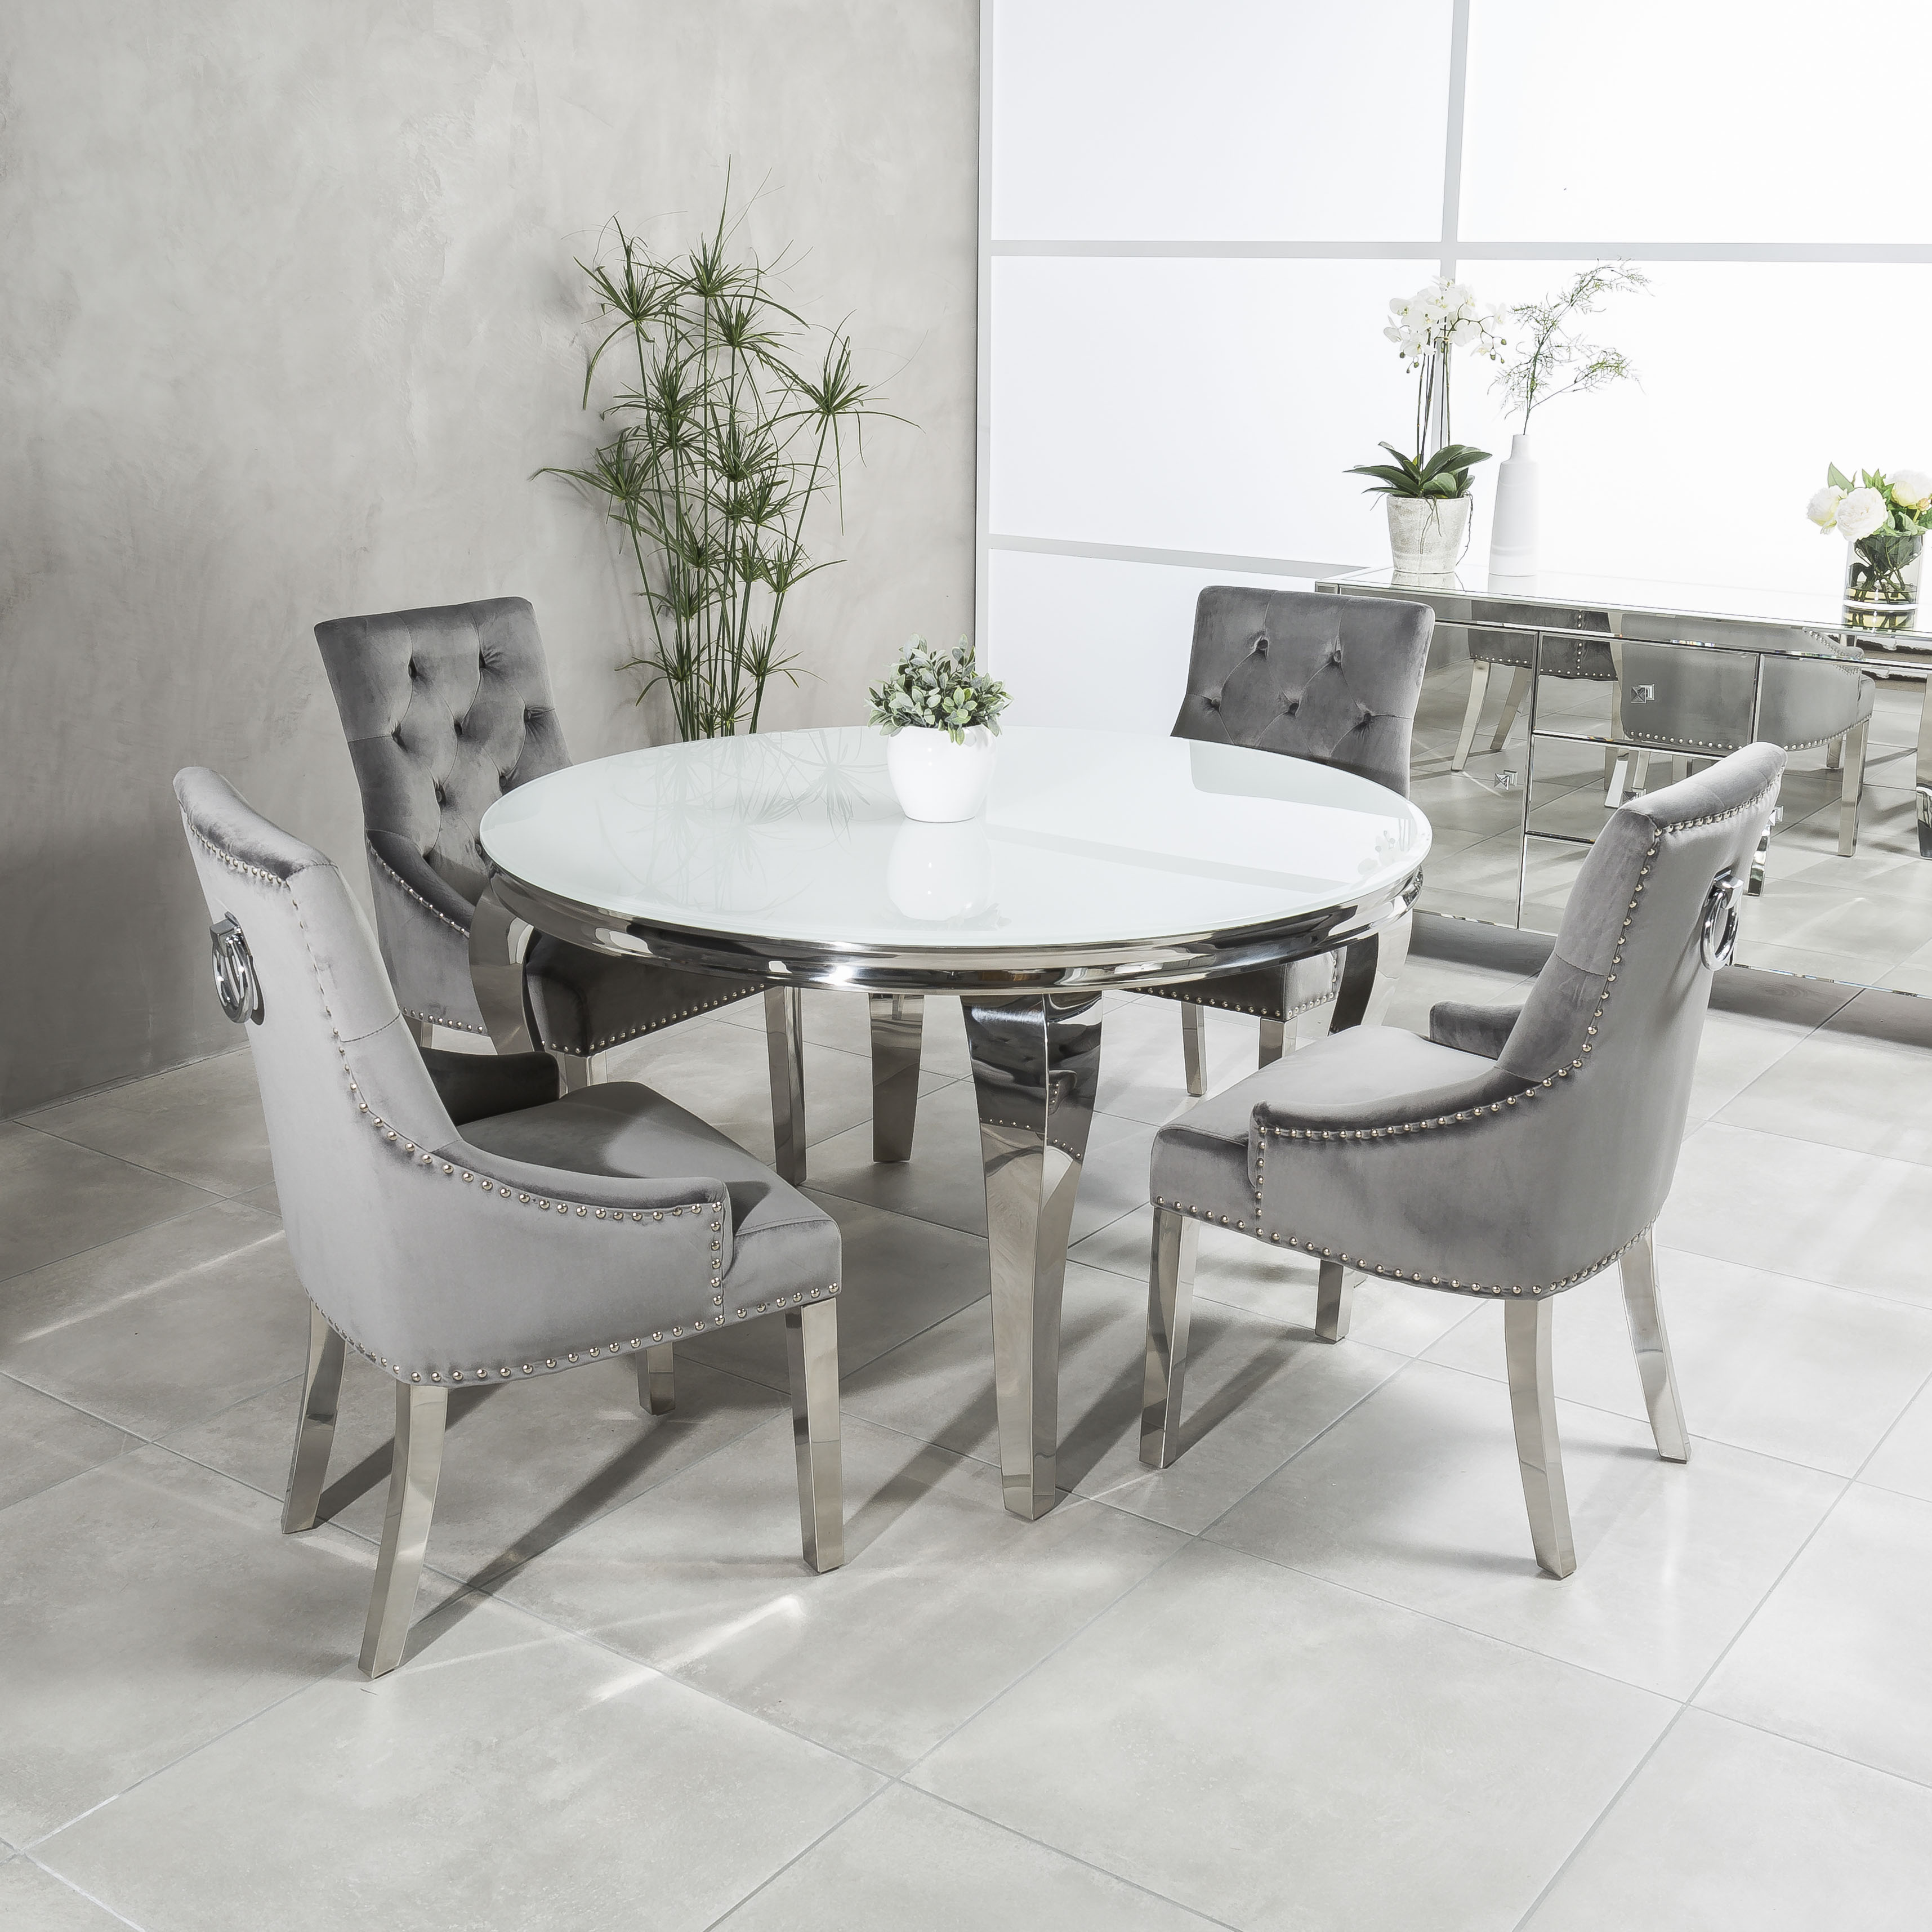 Luxury Dining Room Table And Chair Sets, Circle Dining Table And Chairs Set